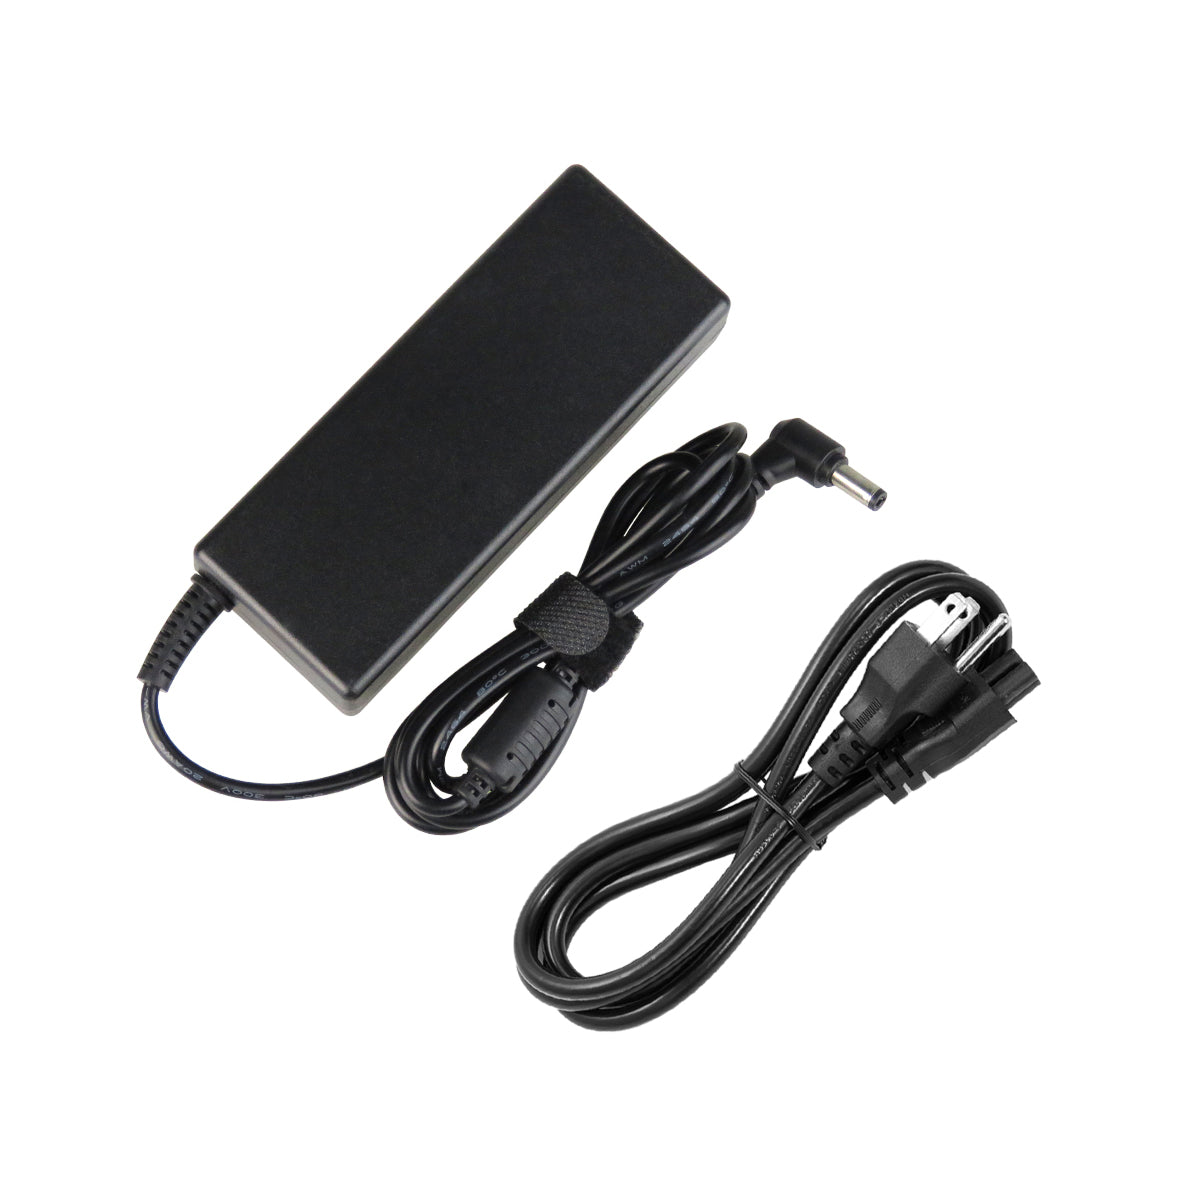 AC Adapter Charger for ASUS K54SV Notebook.